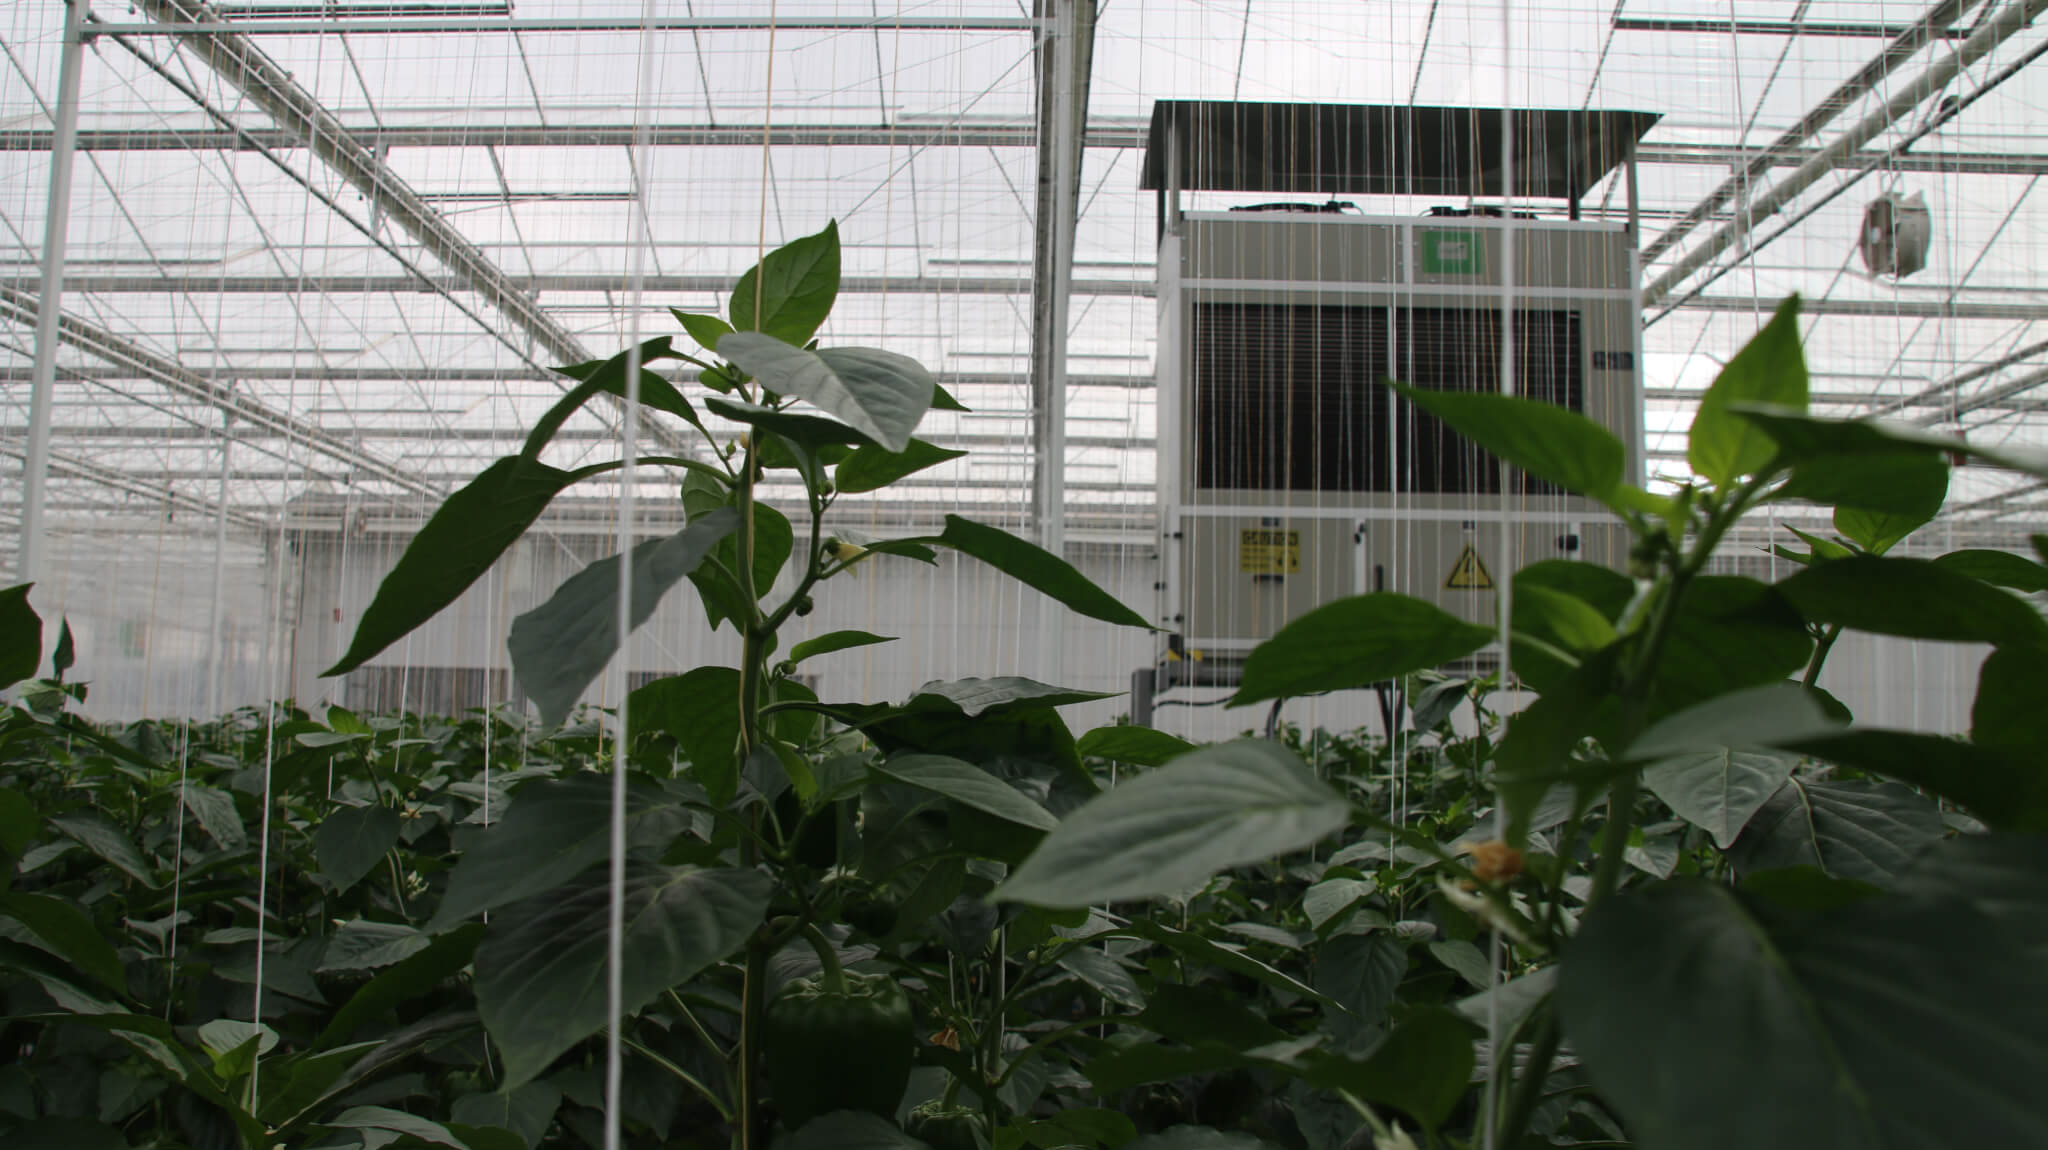 dehumidifier suspended above pepper crops